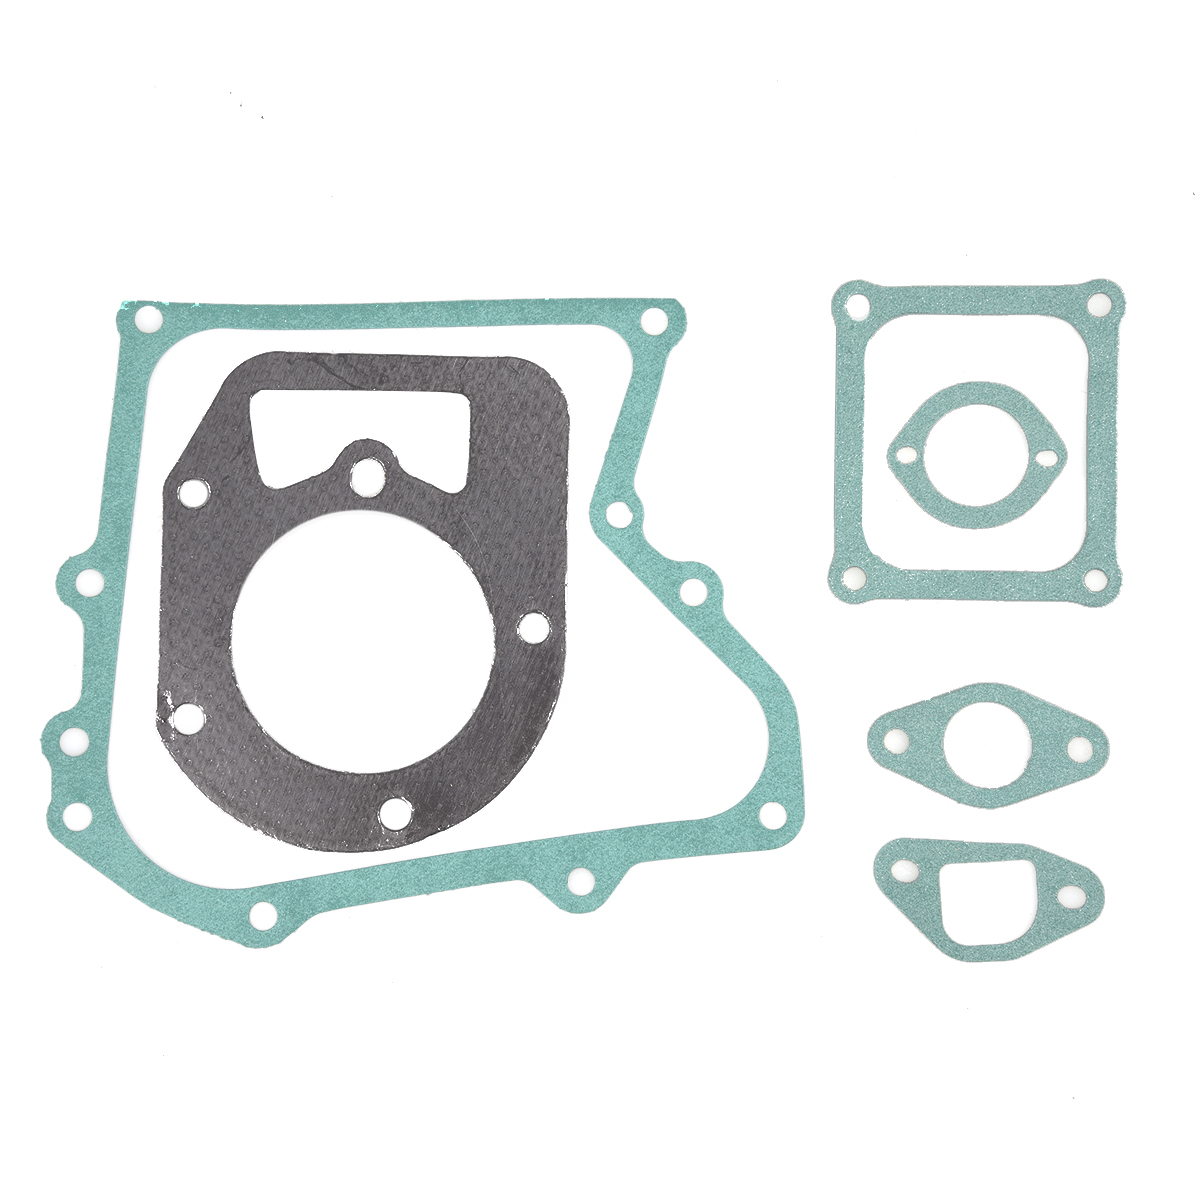 36716A Replacement Gasket Set for Tecumseh Engine OH195 OHH OHSK50